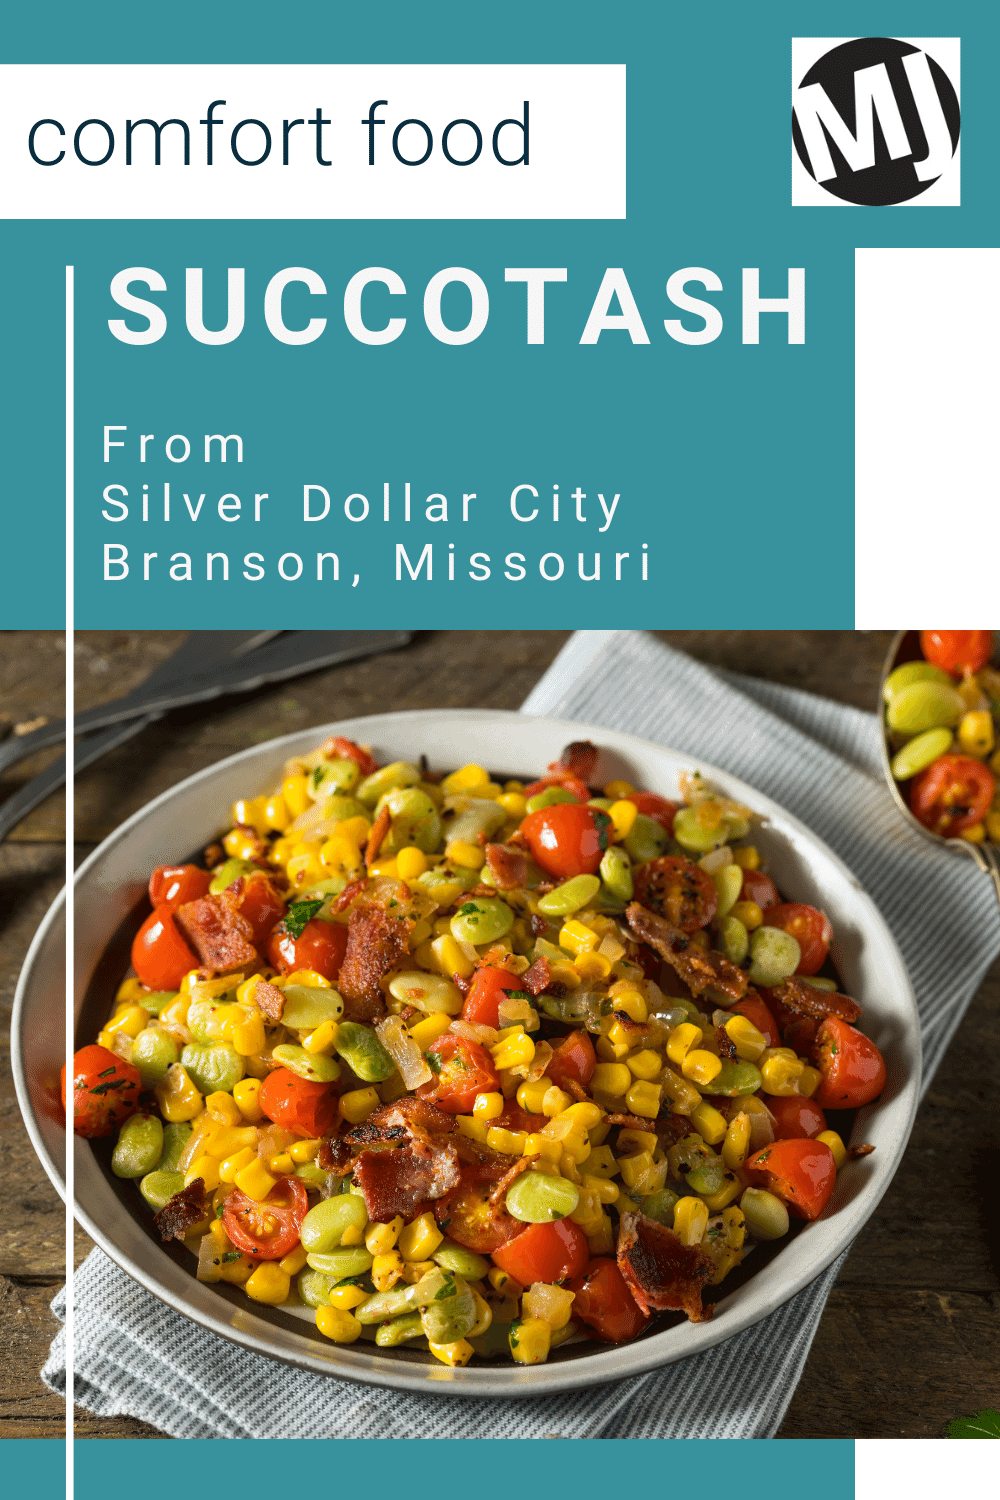 Silver Dollar City’s Succotash Recipe The Comfort Food We Need Right